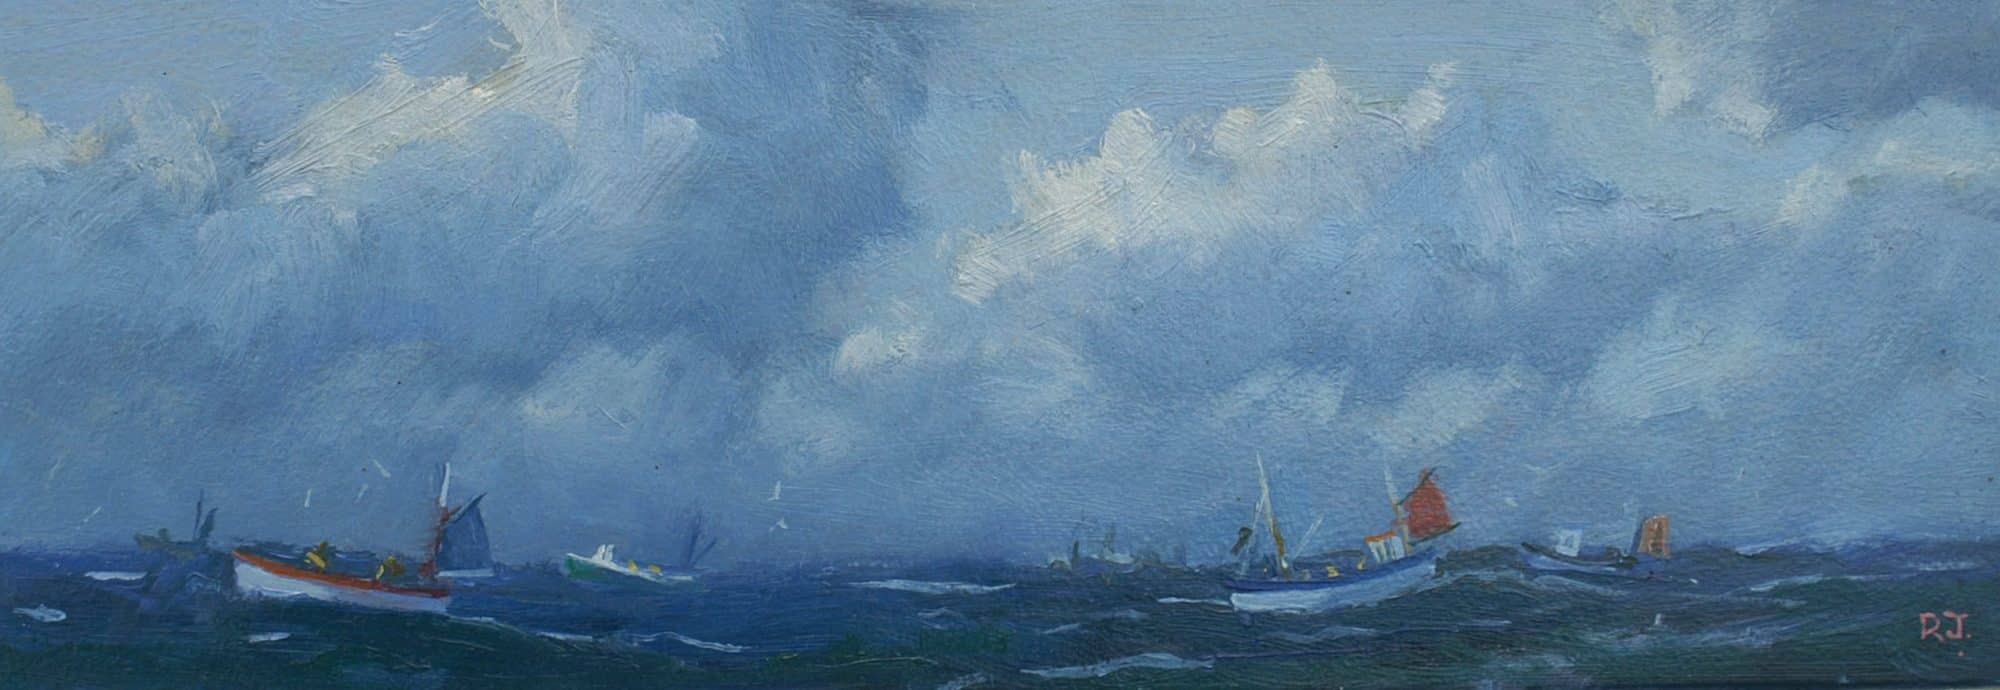 Painting of a handful of small fishing boats against a darkening sky.